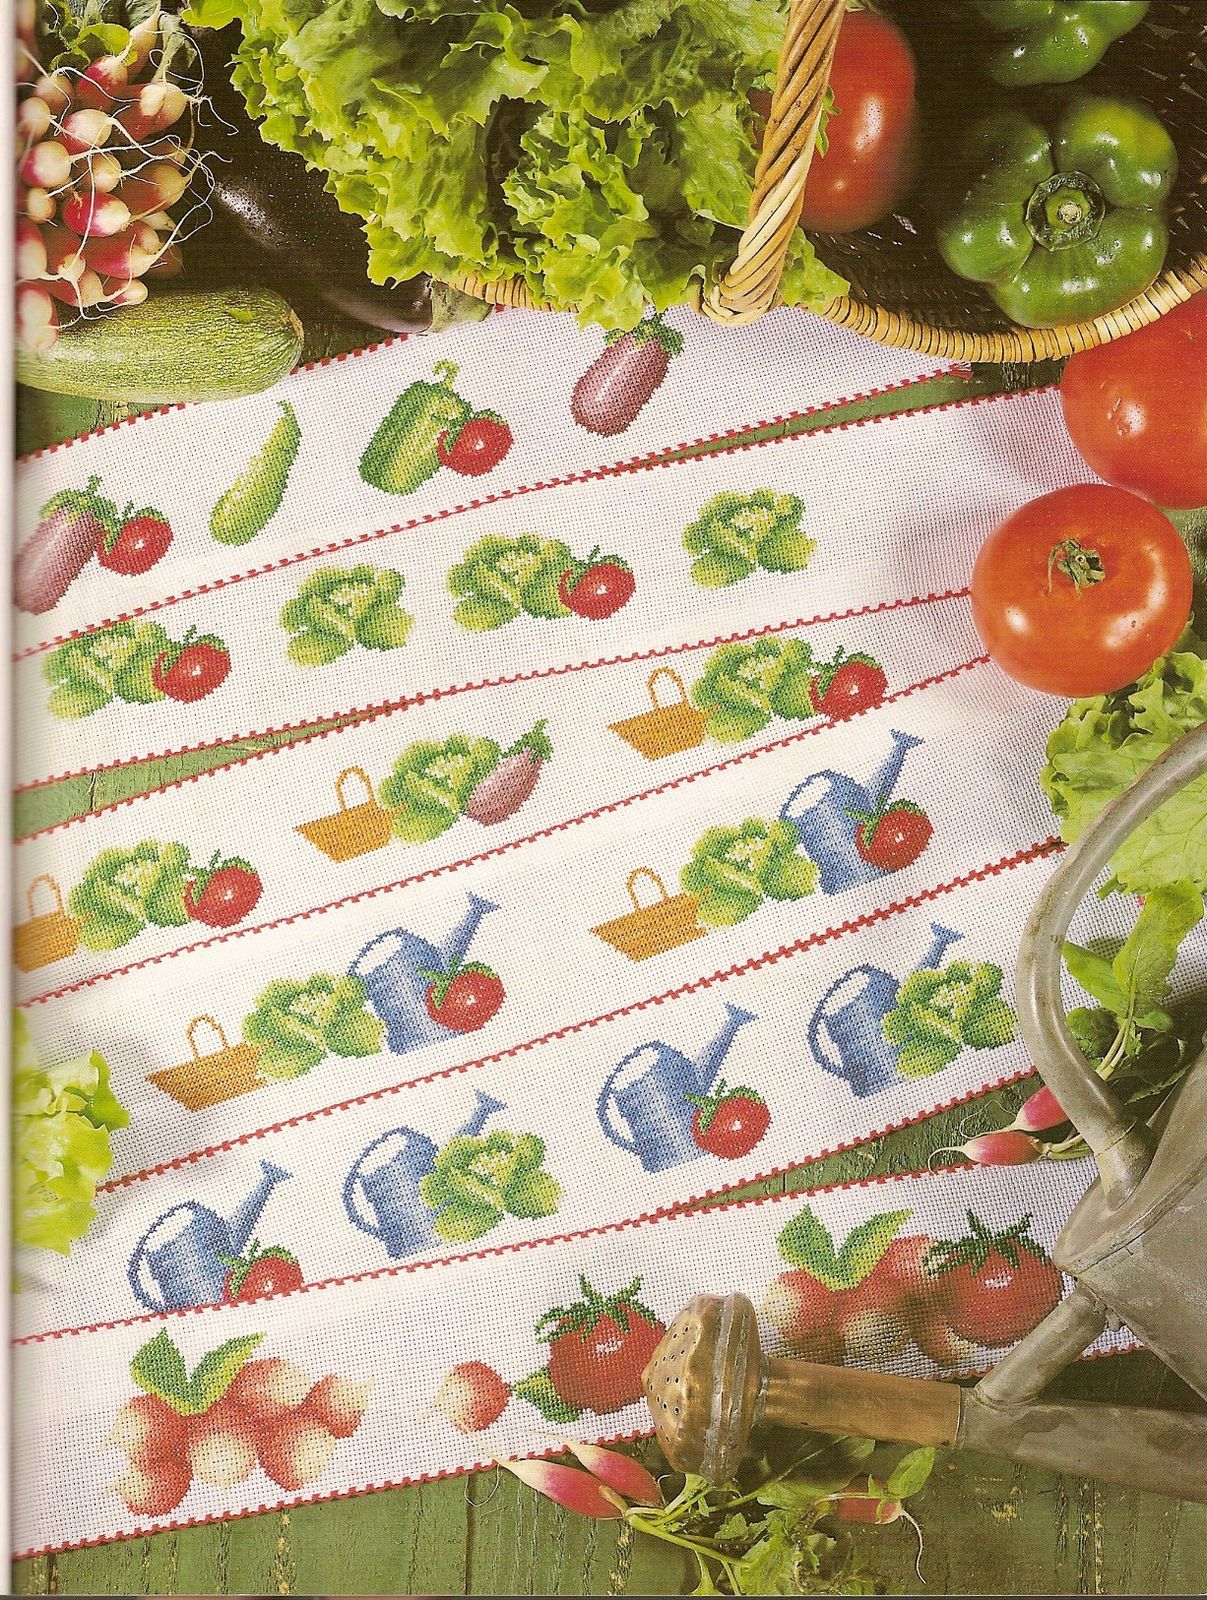 dishtowels cross stitch with fruits and vegetables (1)